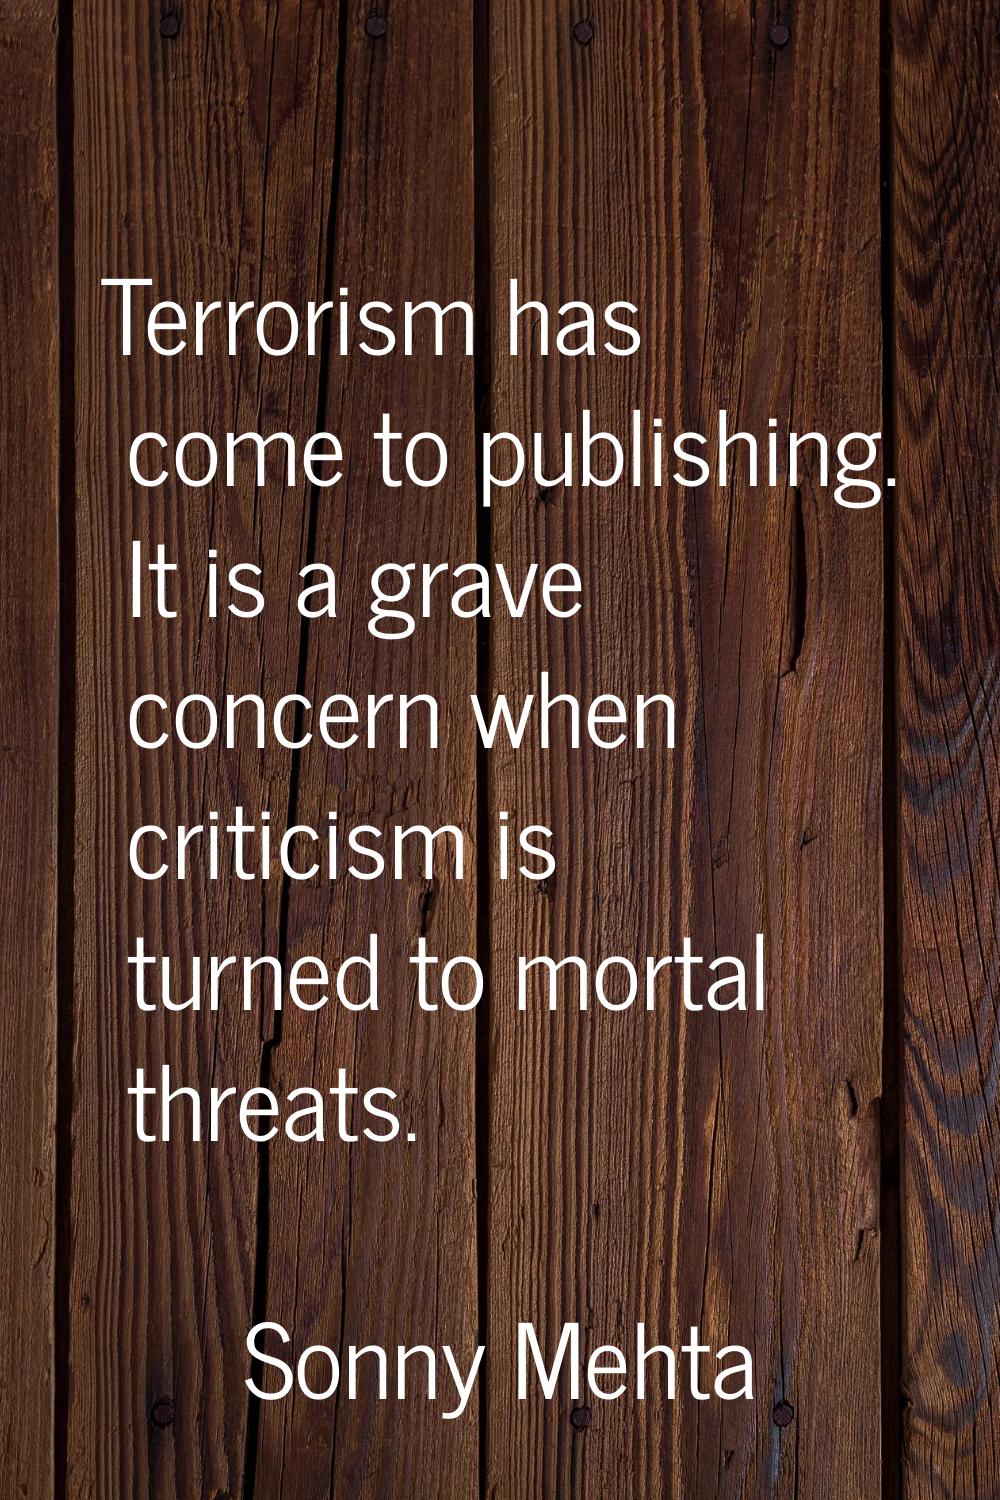 Terrorism has come to publishing. It is a grave concern when criticism is turned to mortal threats.